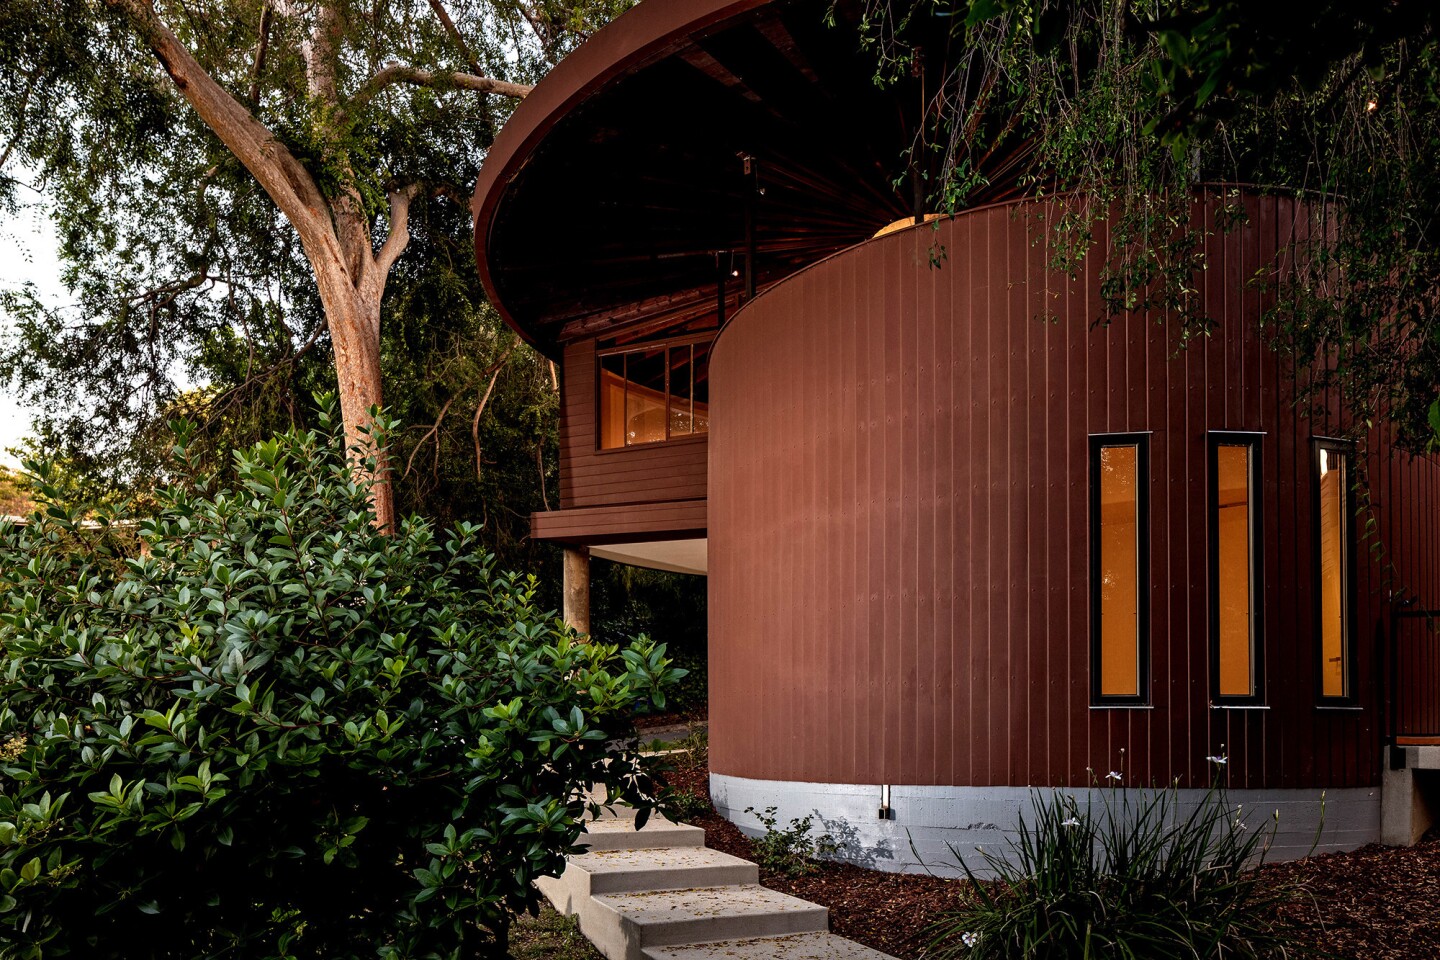 Designed by modernist architect John Lautner, the unusual residence in Sherman Oaks is distinguished by its radiating roofline and views of San Fernando Valley.